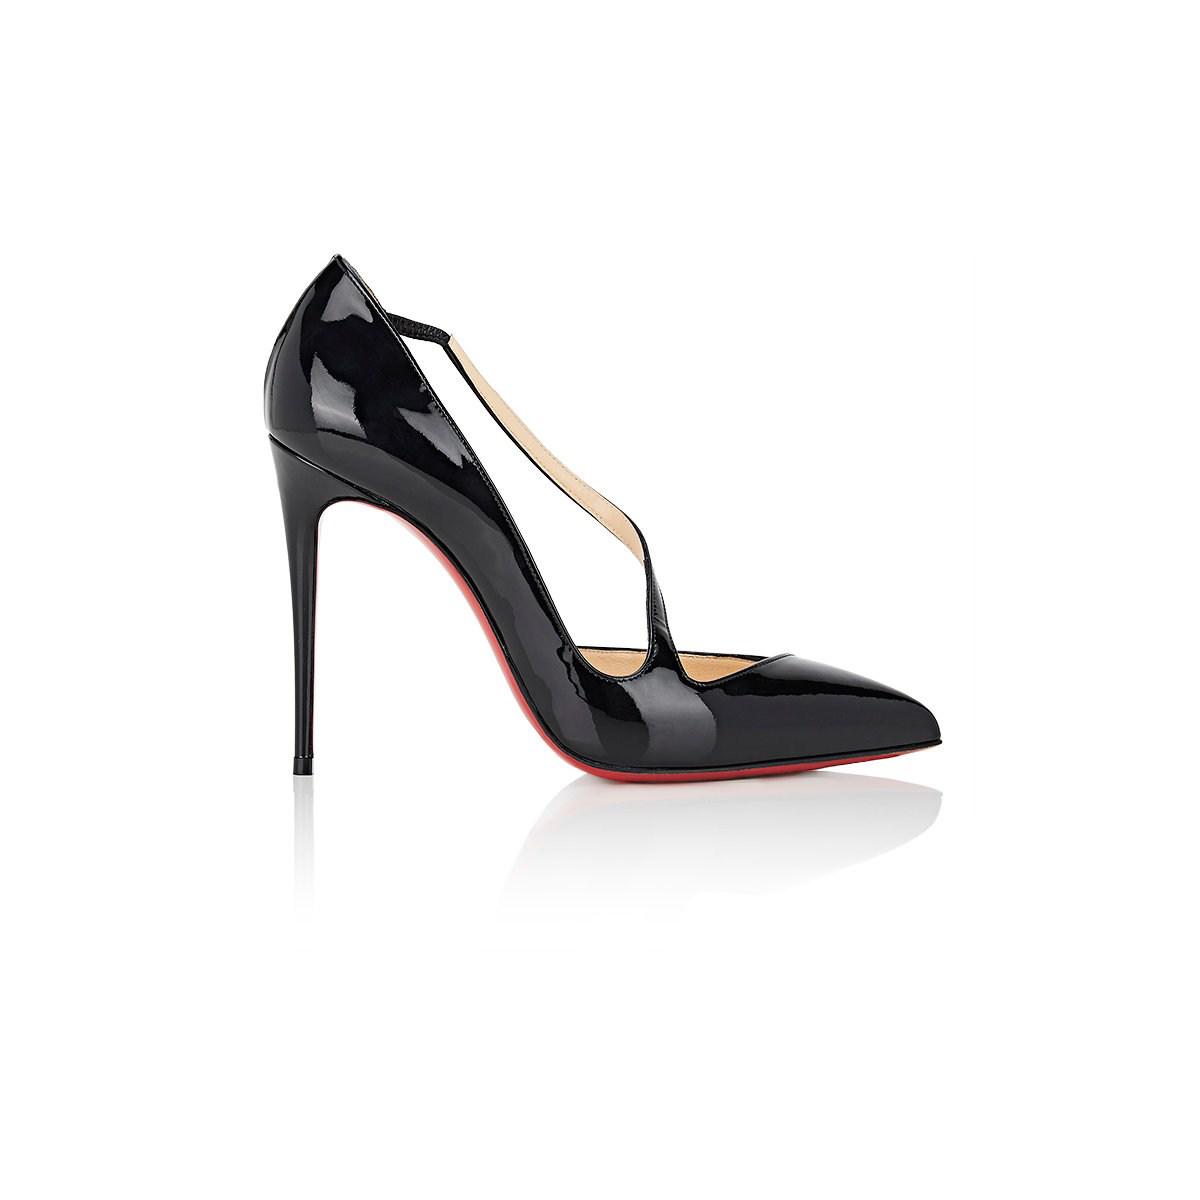 Christian Louboutin Jumping 85 Patent Leather Pumps in Black - Lyst